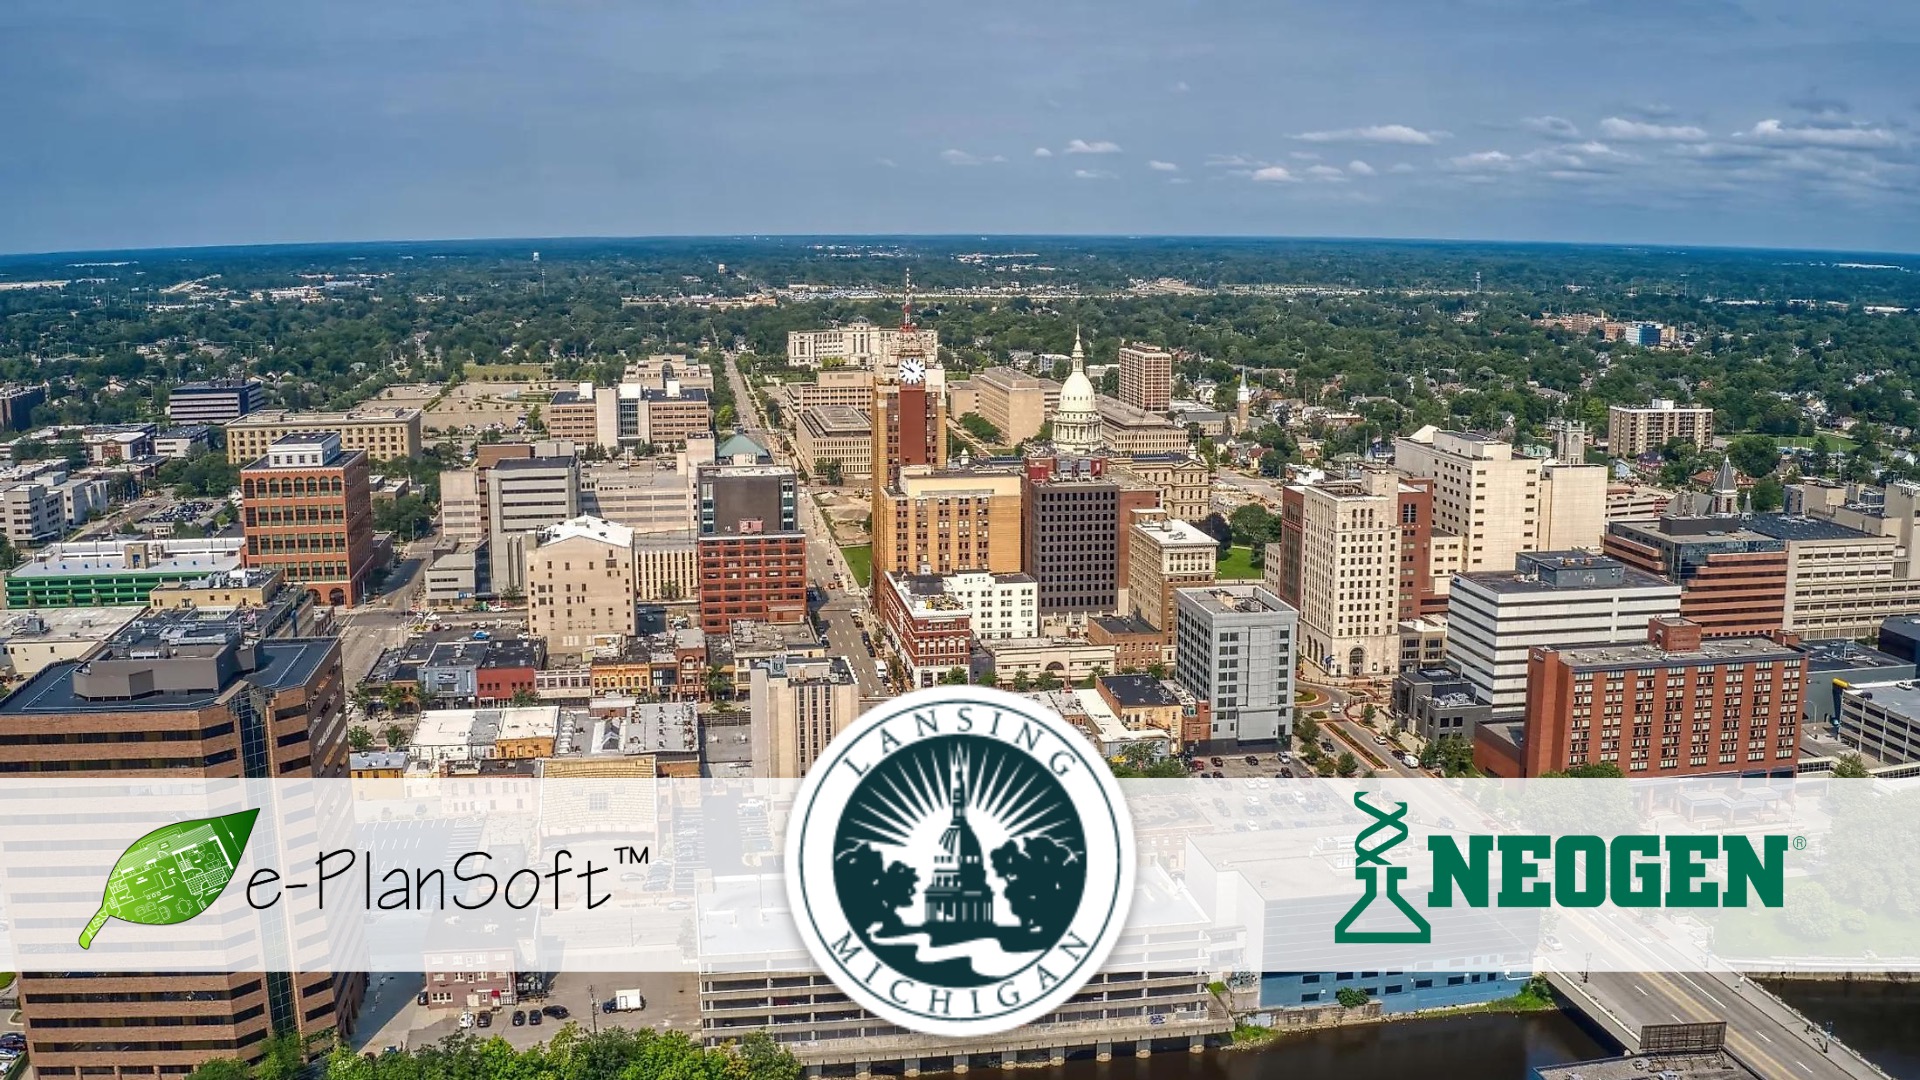 Neogen's State-of-the-Art Facility: A Seamless Partnership with e-PlanSoft™ In Lansing, MI